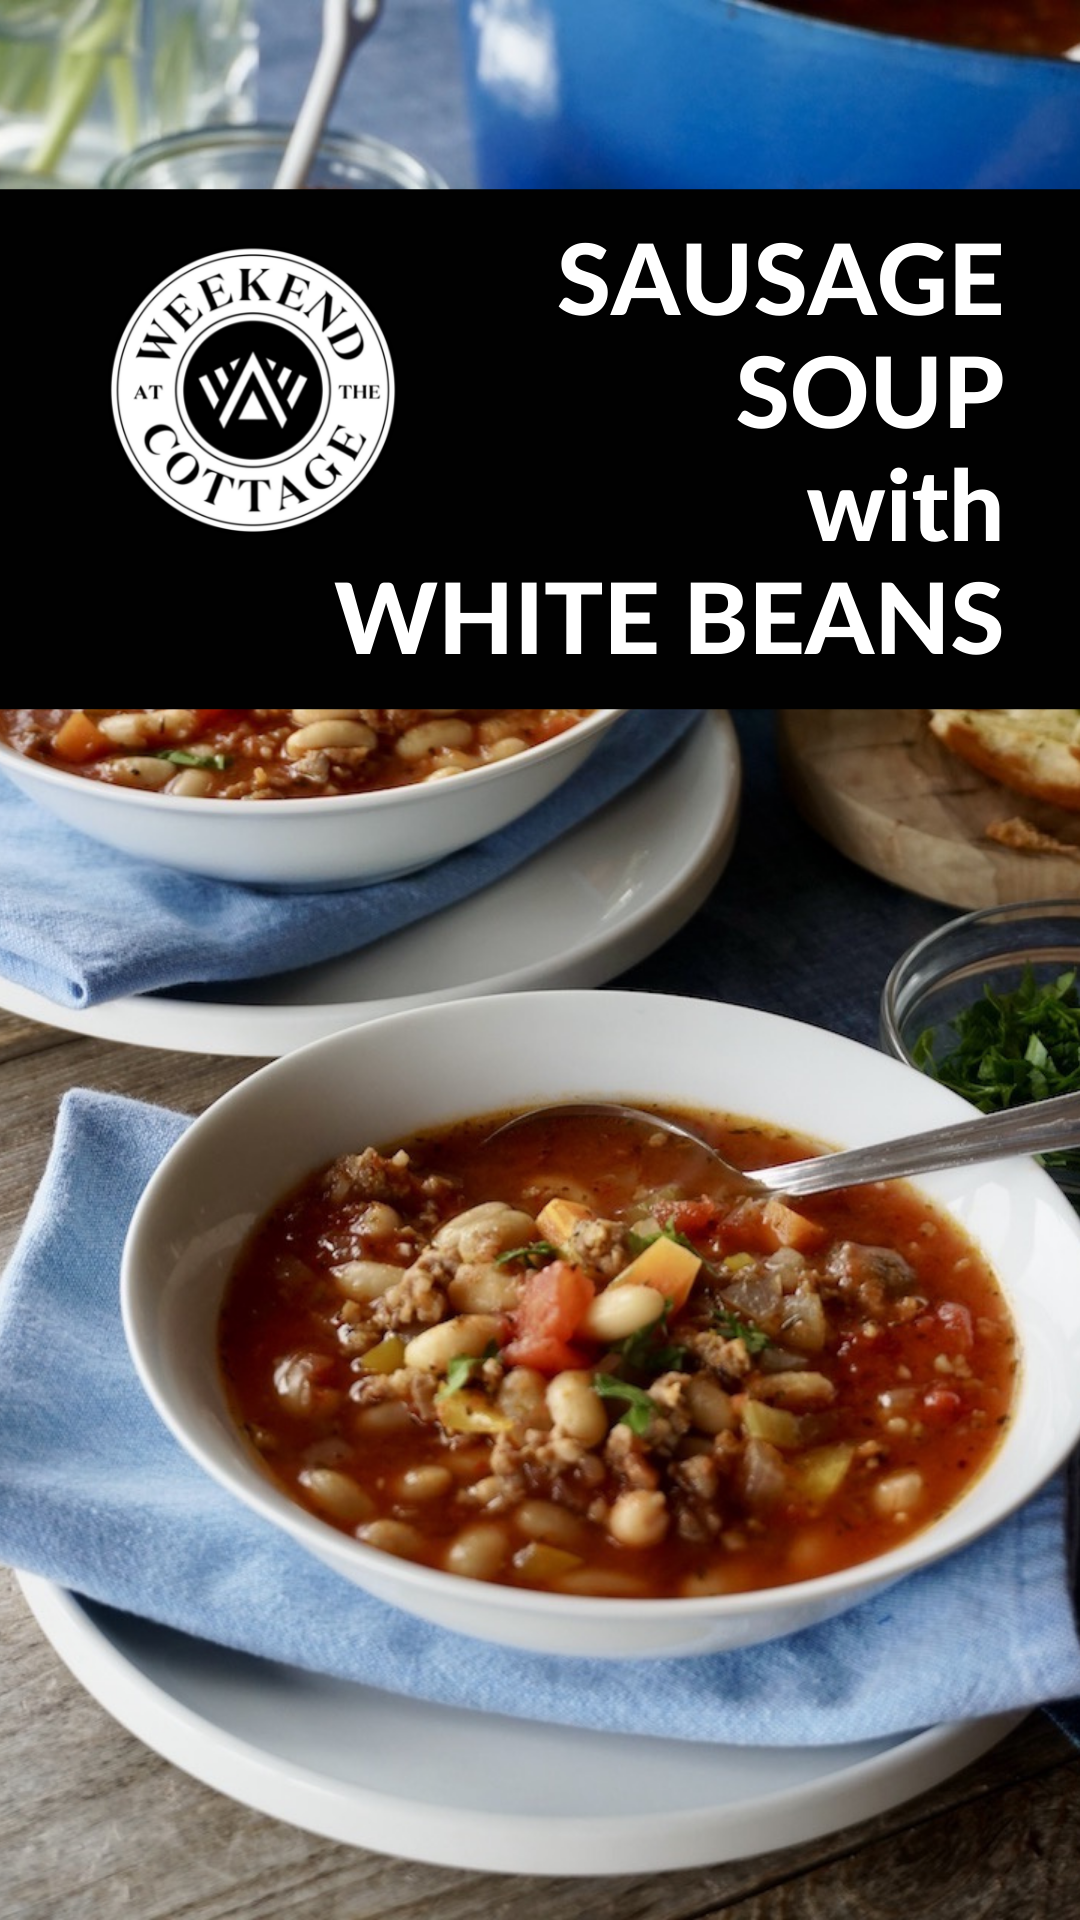 Sausage Soup with White Beans